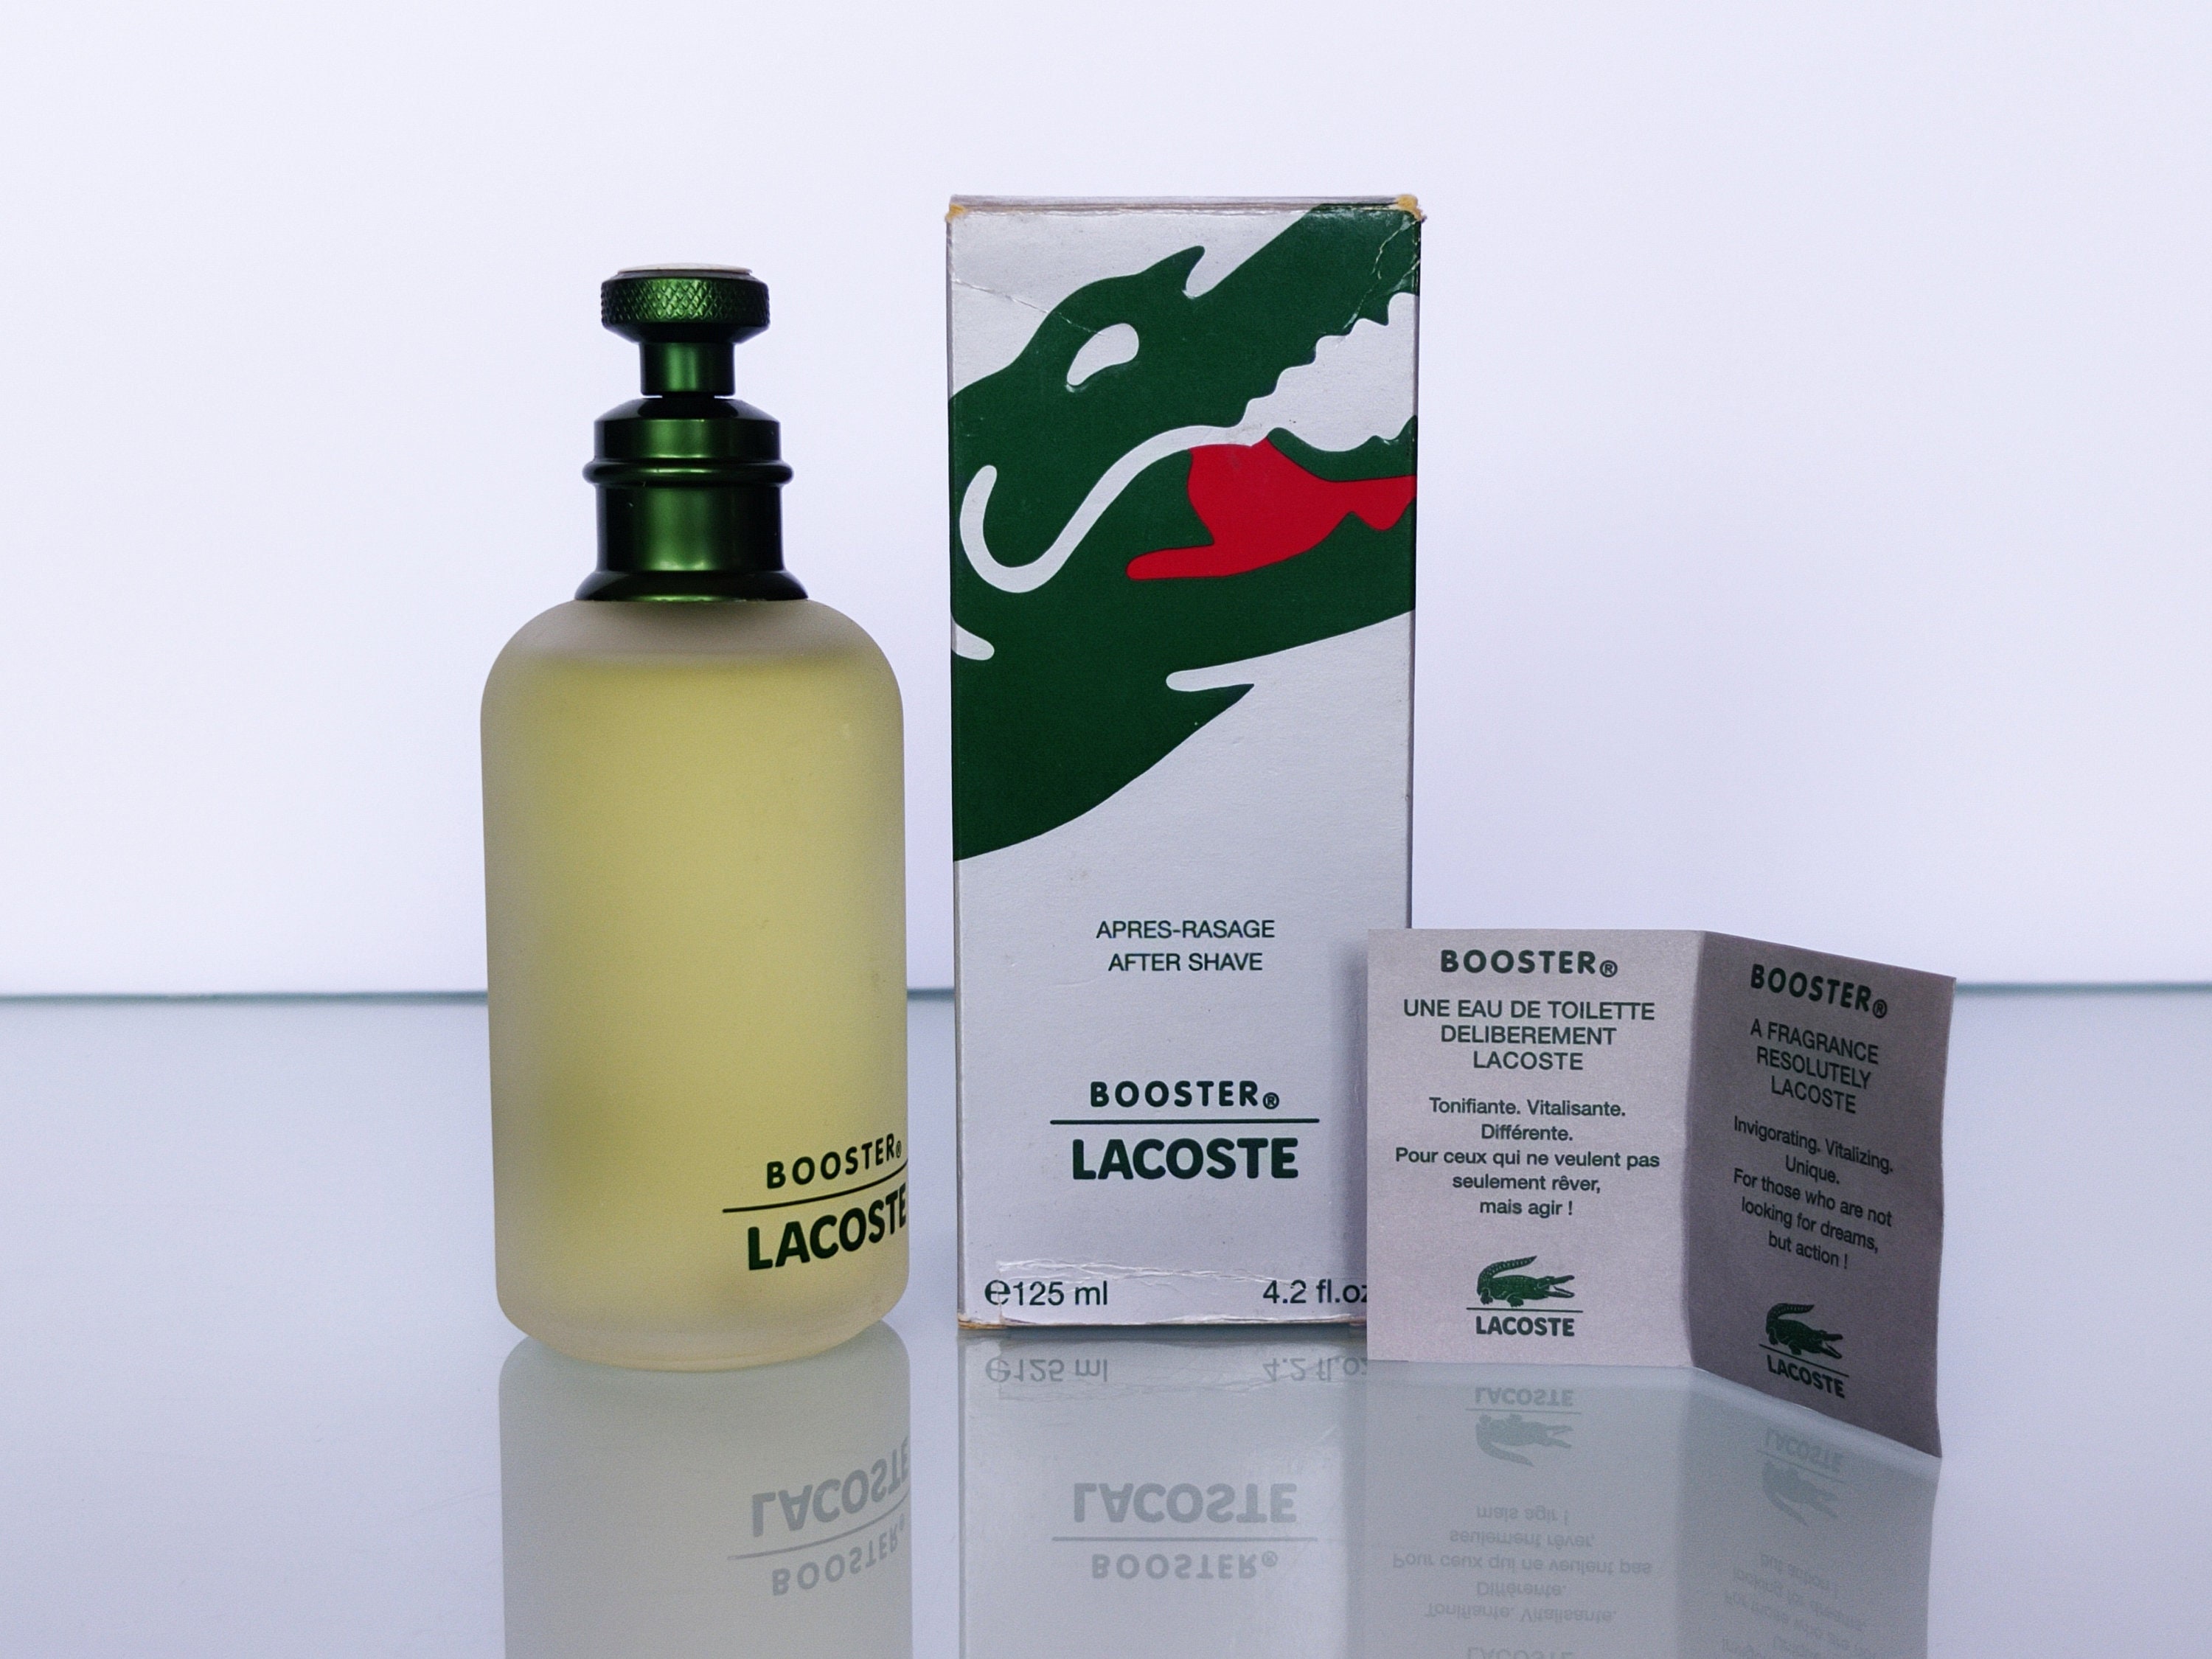 Booster 1996 by Lacoste After 125 Ml/4.2 US Fl.oz. - Etsy Norway